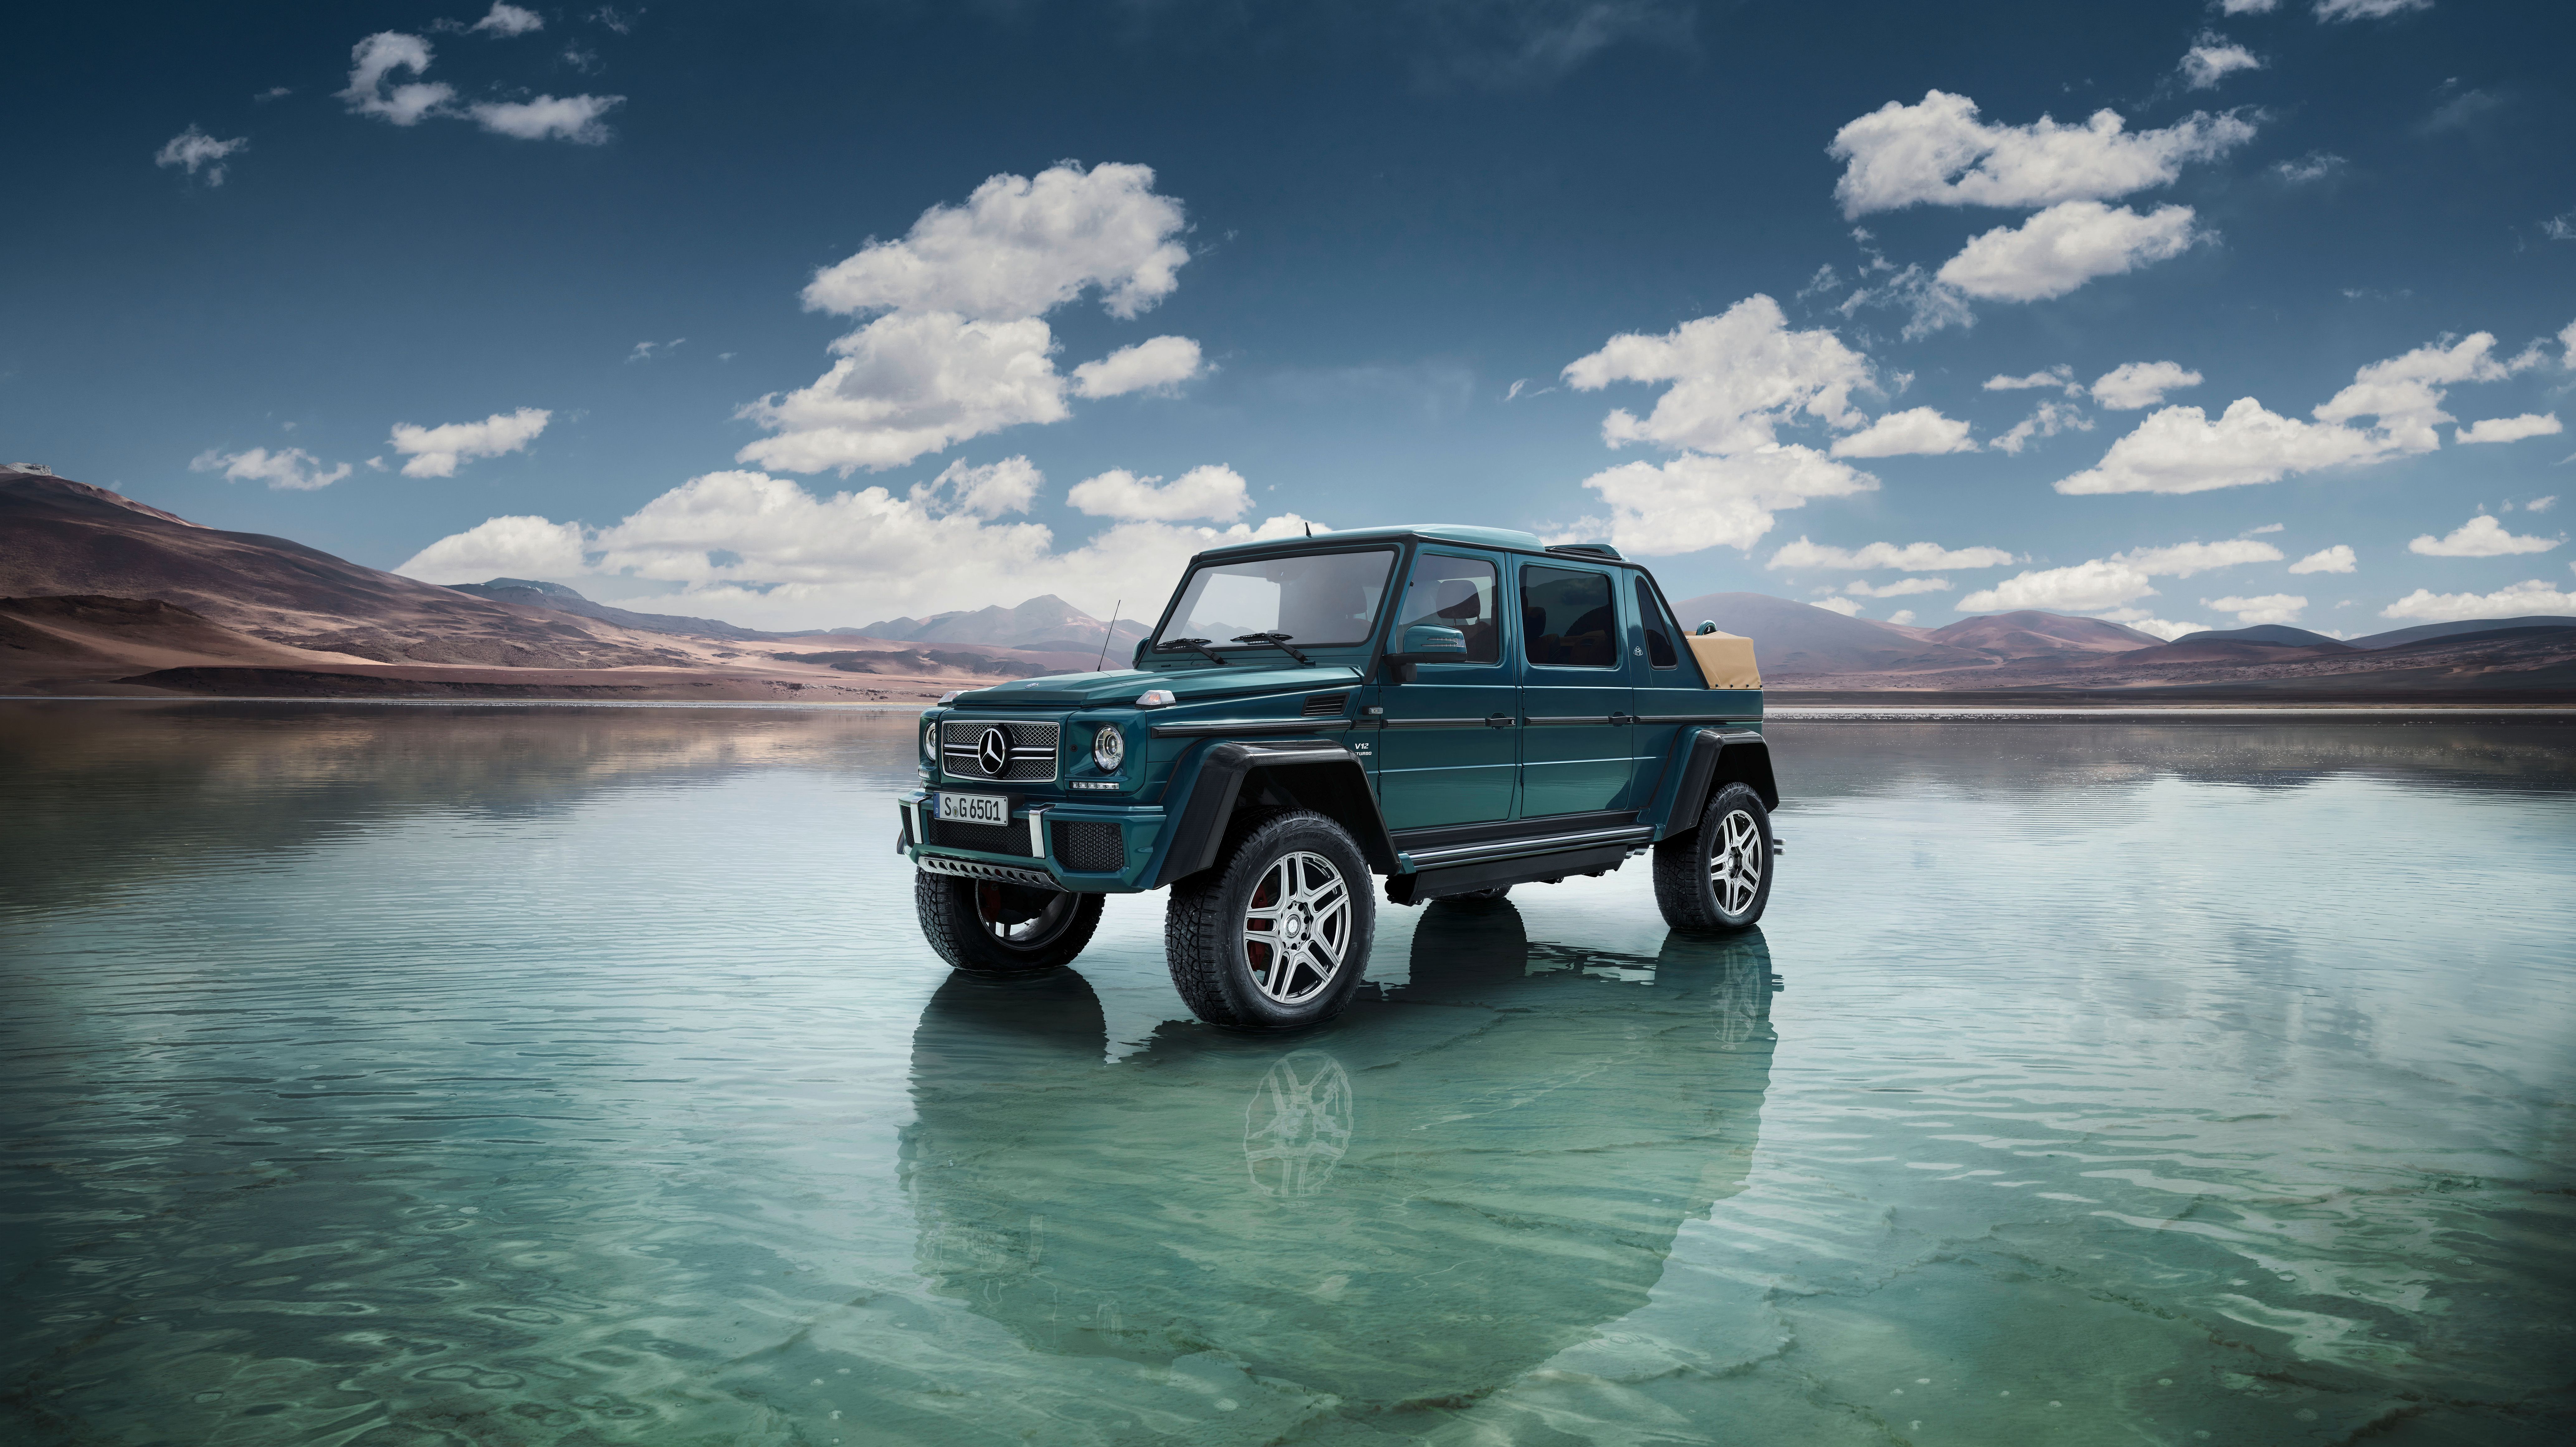 Wallpapers Mercedes-Maybach G 650 Landaulet 2017 view from front front of on the desktop